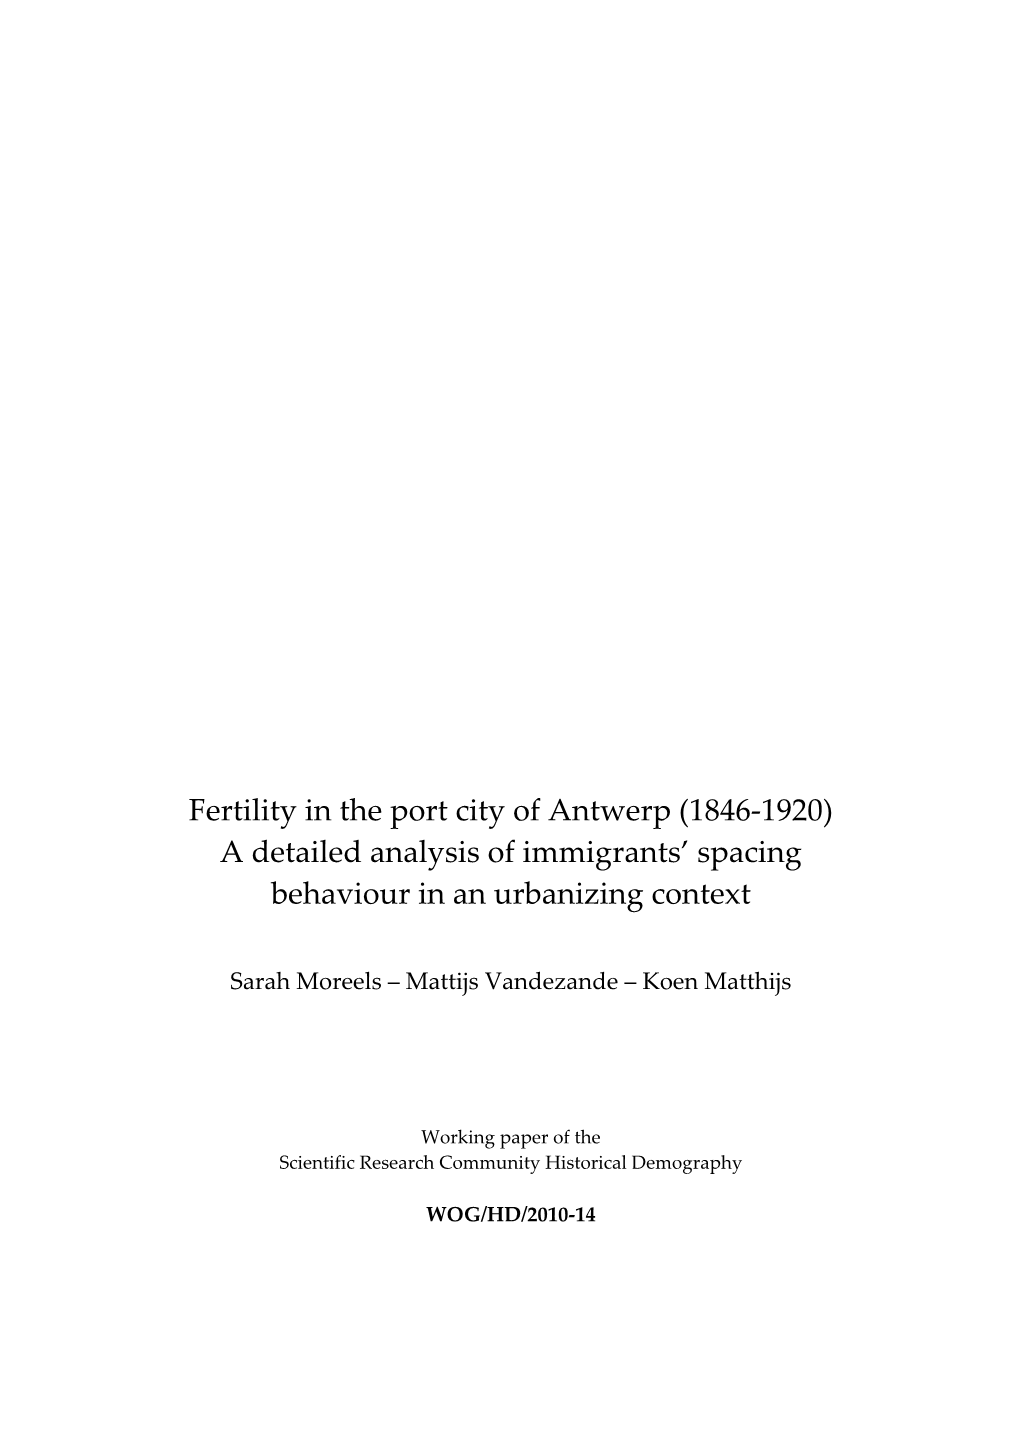 Fertility in the Port City of Antwerp (1846‐1920) a Detailed Analysis of Immigrants’ Spacing Behaviour in an Urbanizing Context